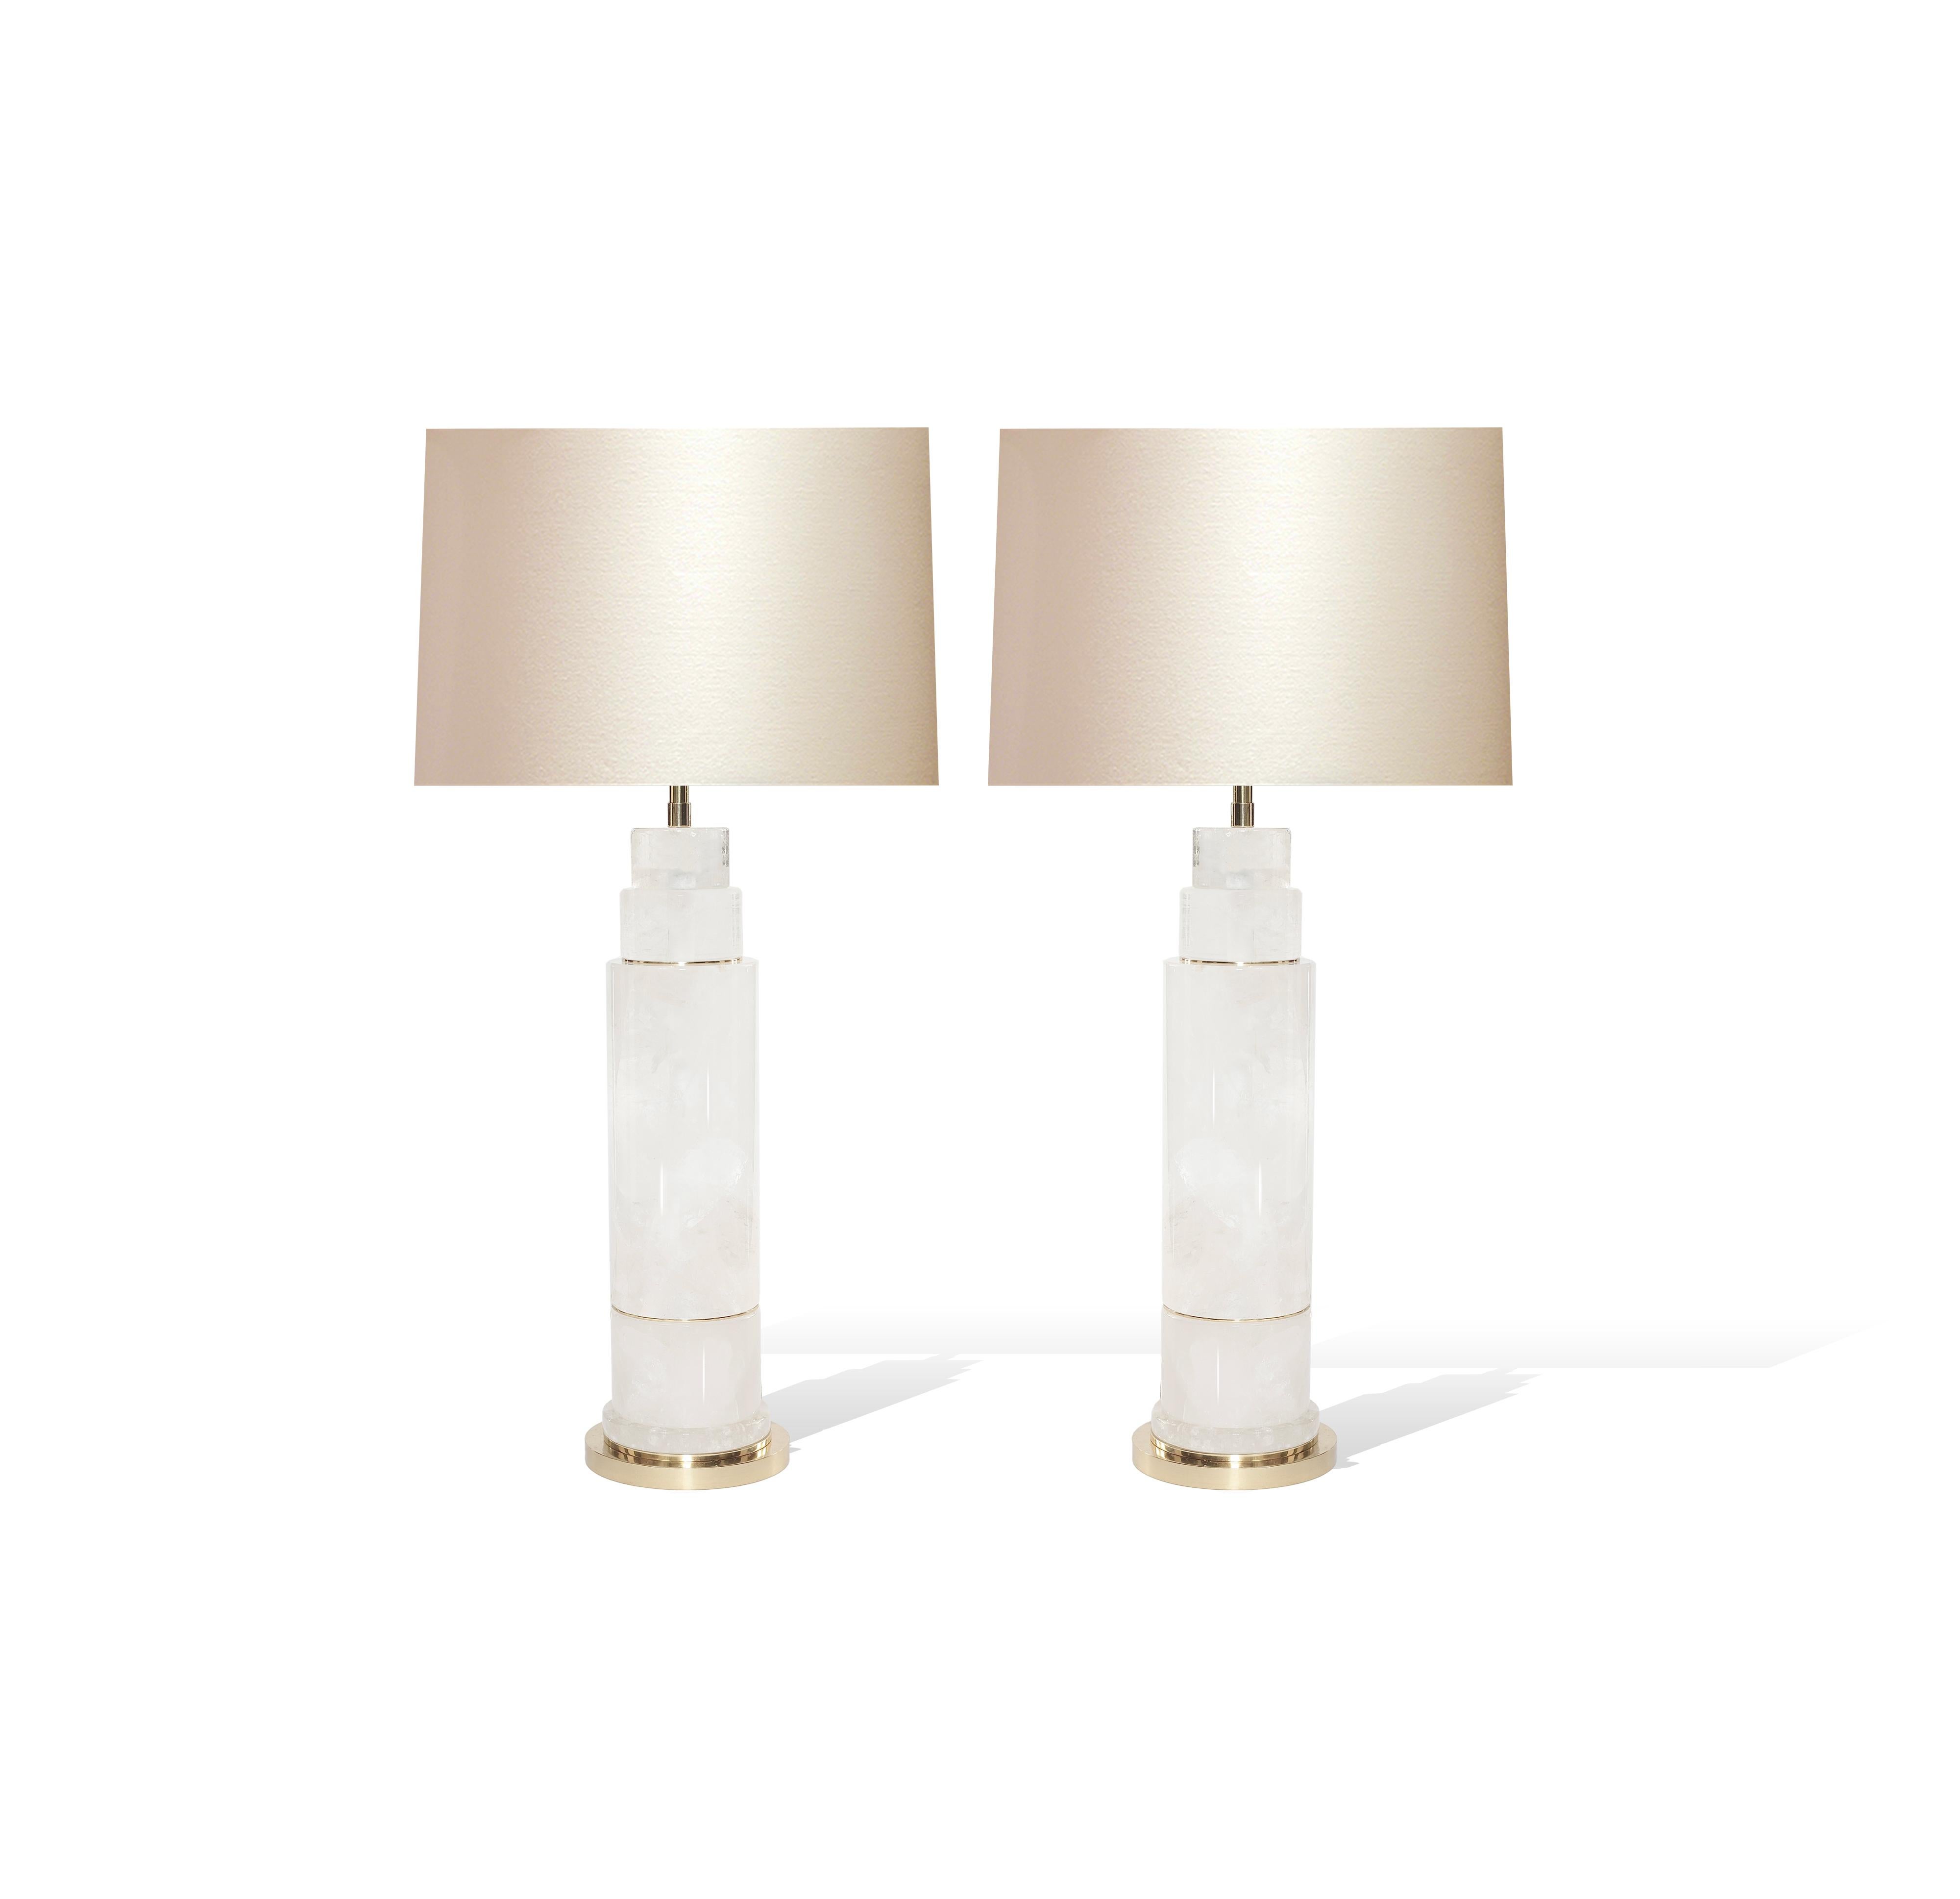 Pair of sectional column rock crystal lamps with polished brass inserts and bases. Created by Phoenix Gallery, NYC.
To the top of rock crystal: 17”/H
(Lampshade not included.)